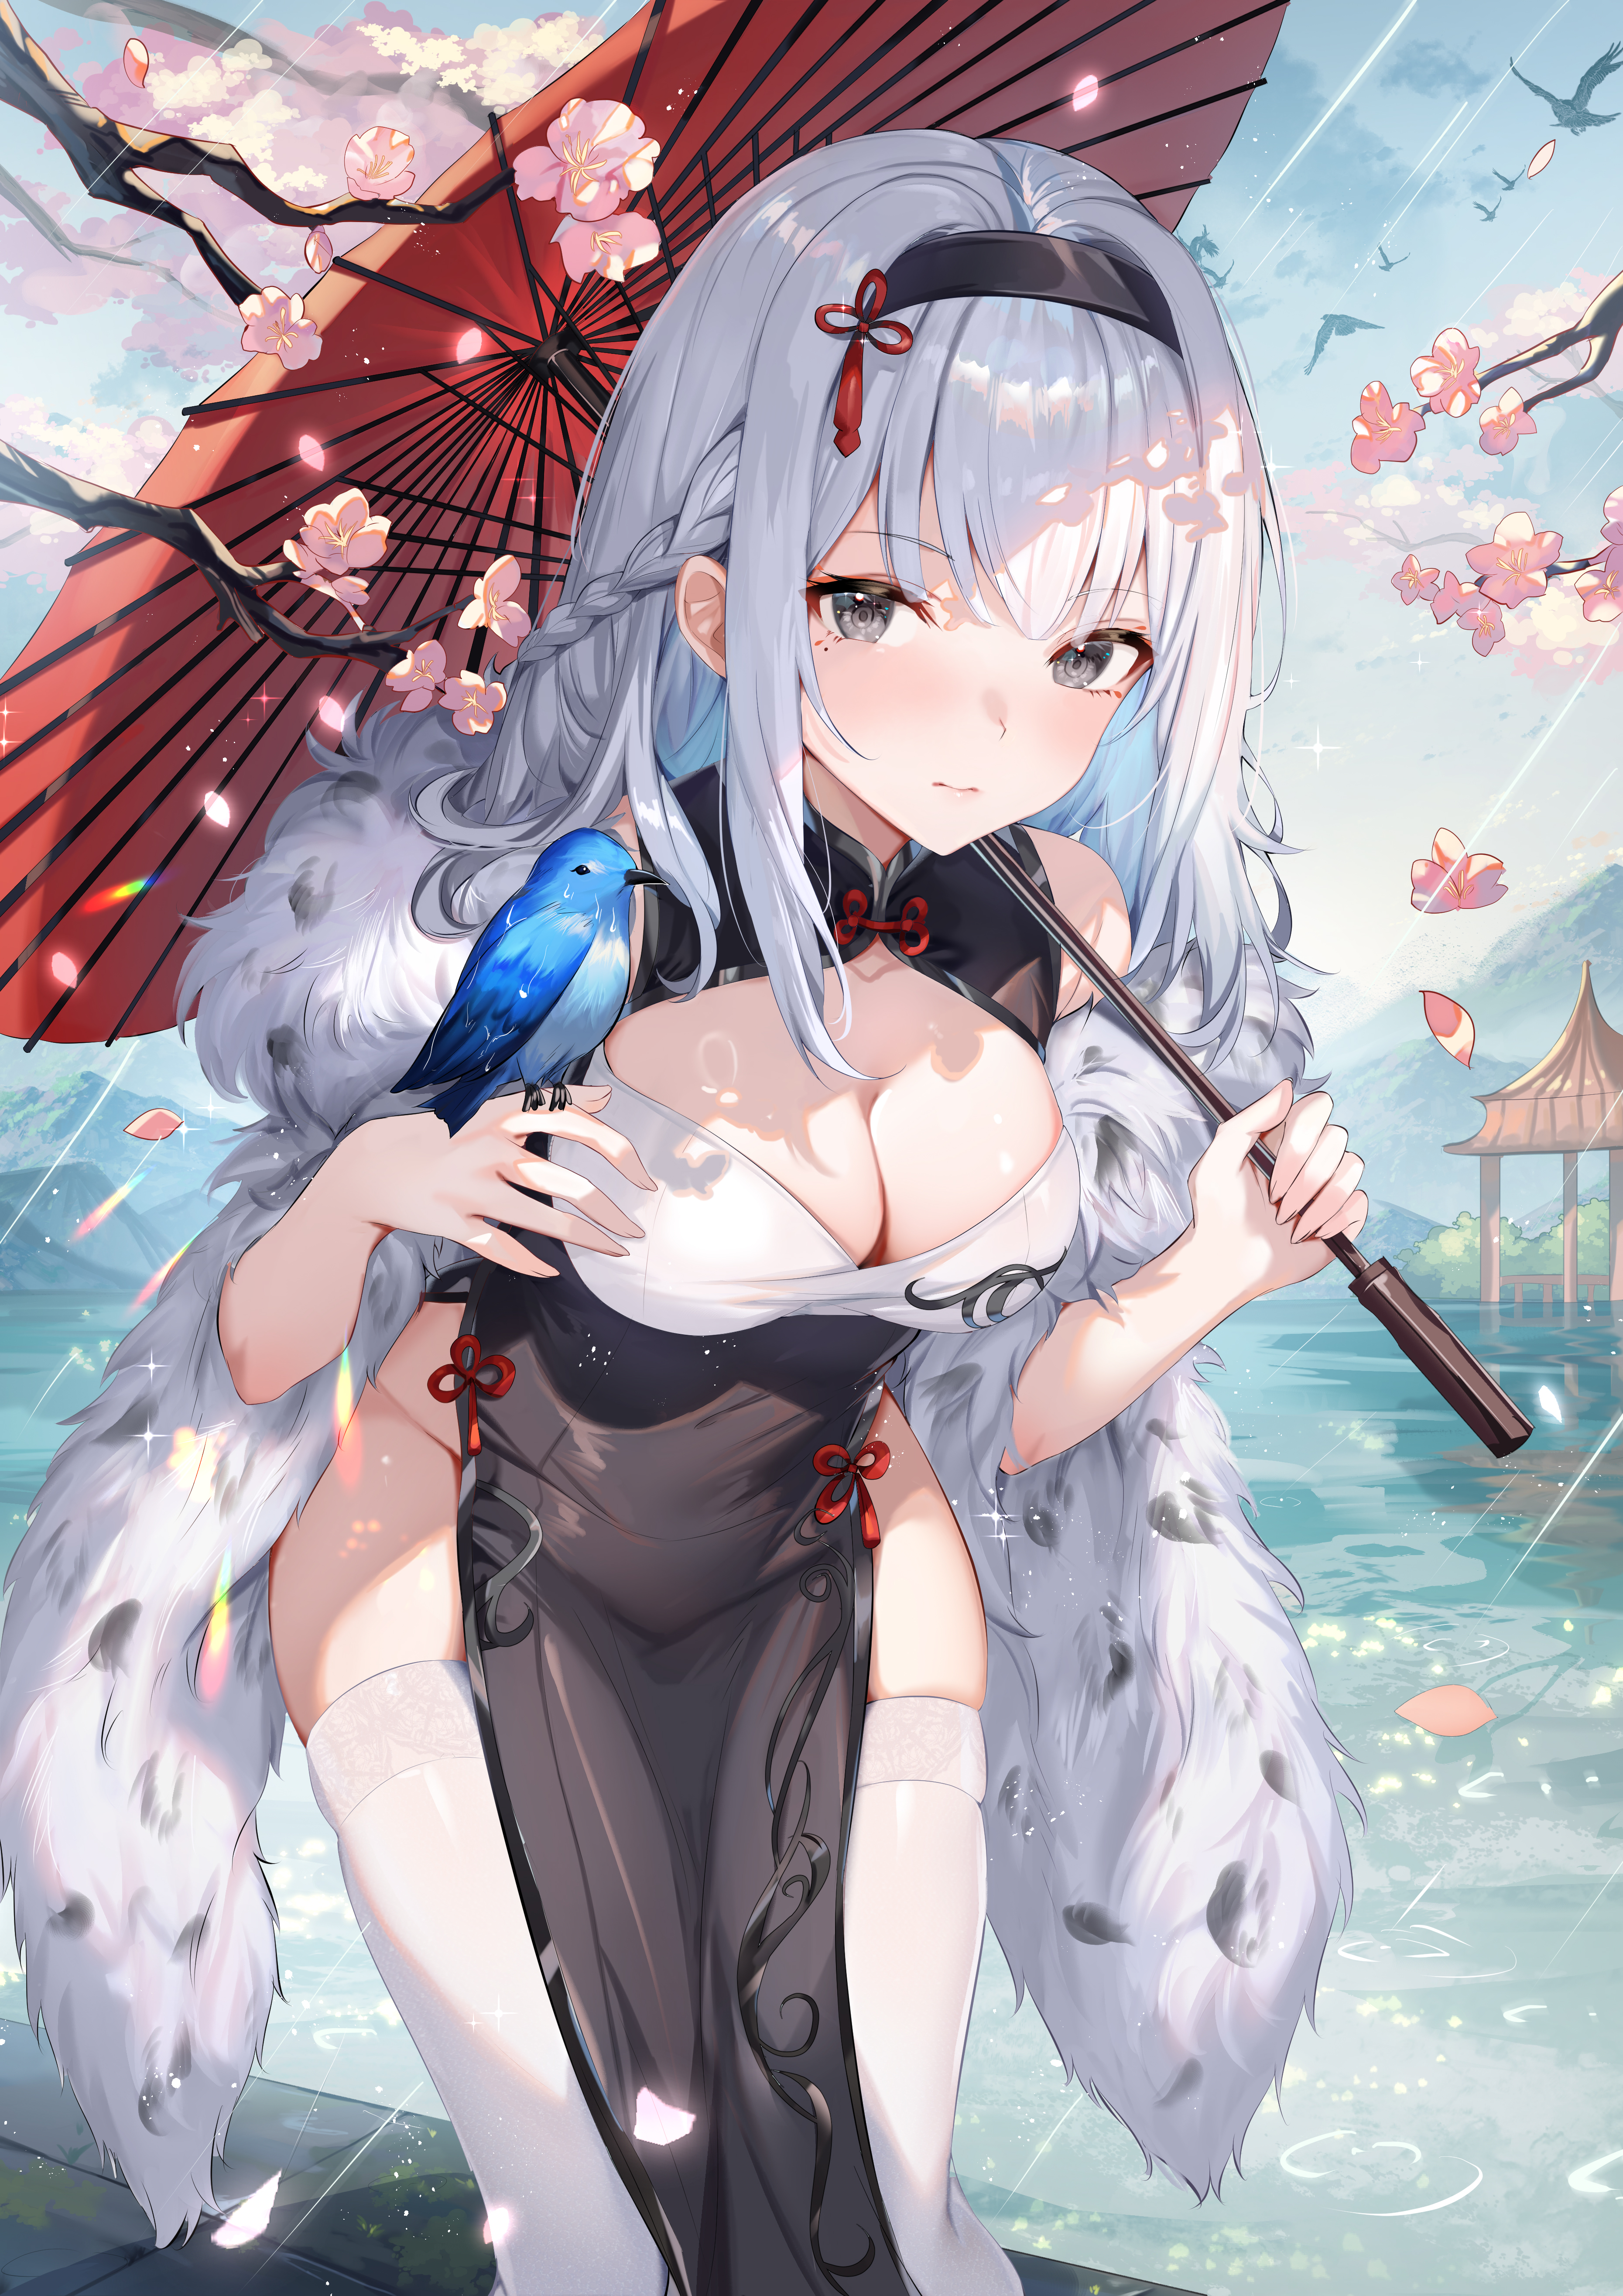 Anime 3720x5262 anime anime girls Snowbreak: Containment Zone Ji Chenxing Gejigejier closed mouth leaning portrait display cleavage bare shoulders animals paper umbrellas umbrella outdoors women outdoors rain water petals branch flowers stockings white stockings thighs headband big boobs sky birds french braids braids looking at viewer fur coats Chinese clothing standing